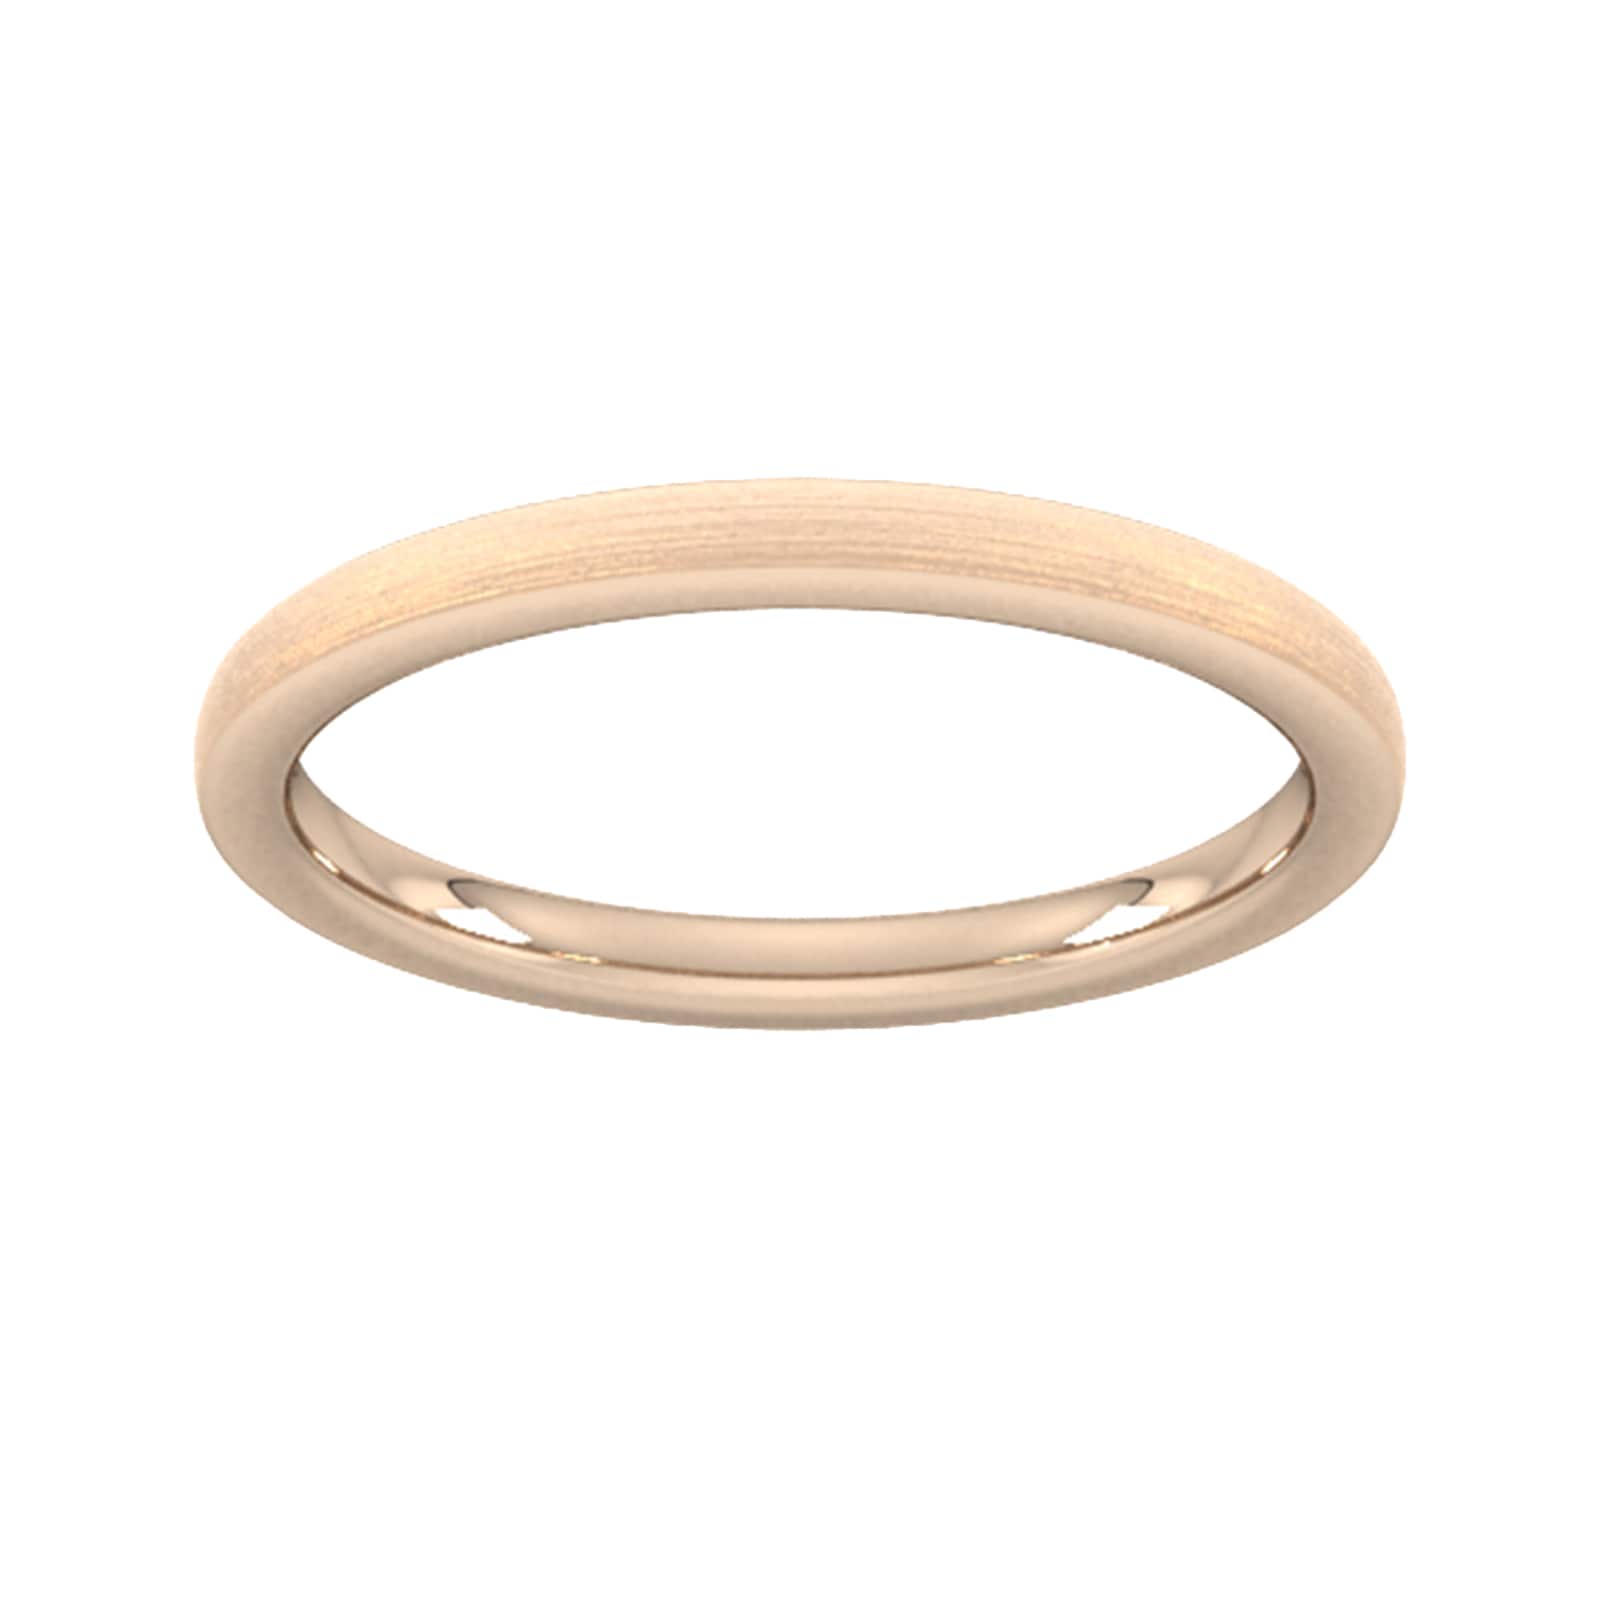 2mm Slight Court Extra Heavy Polished Chamfered Edges With Matt Centre Wedding Ring In 18 Carat Rose Gold - Ring Size J